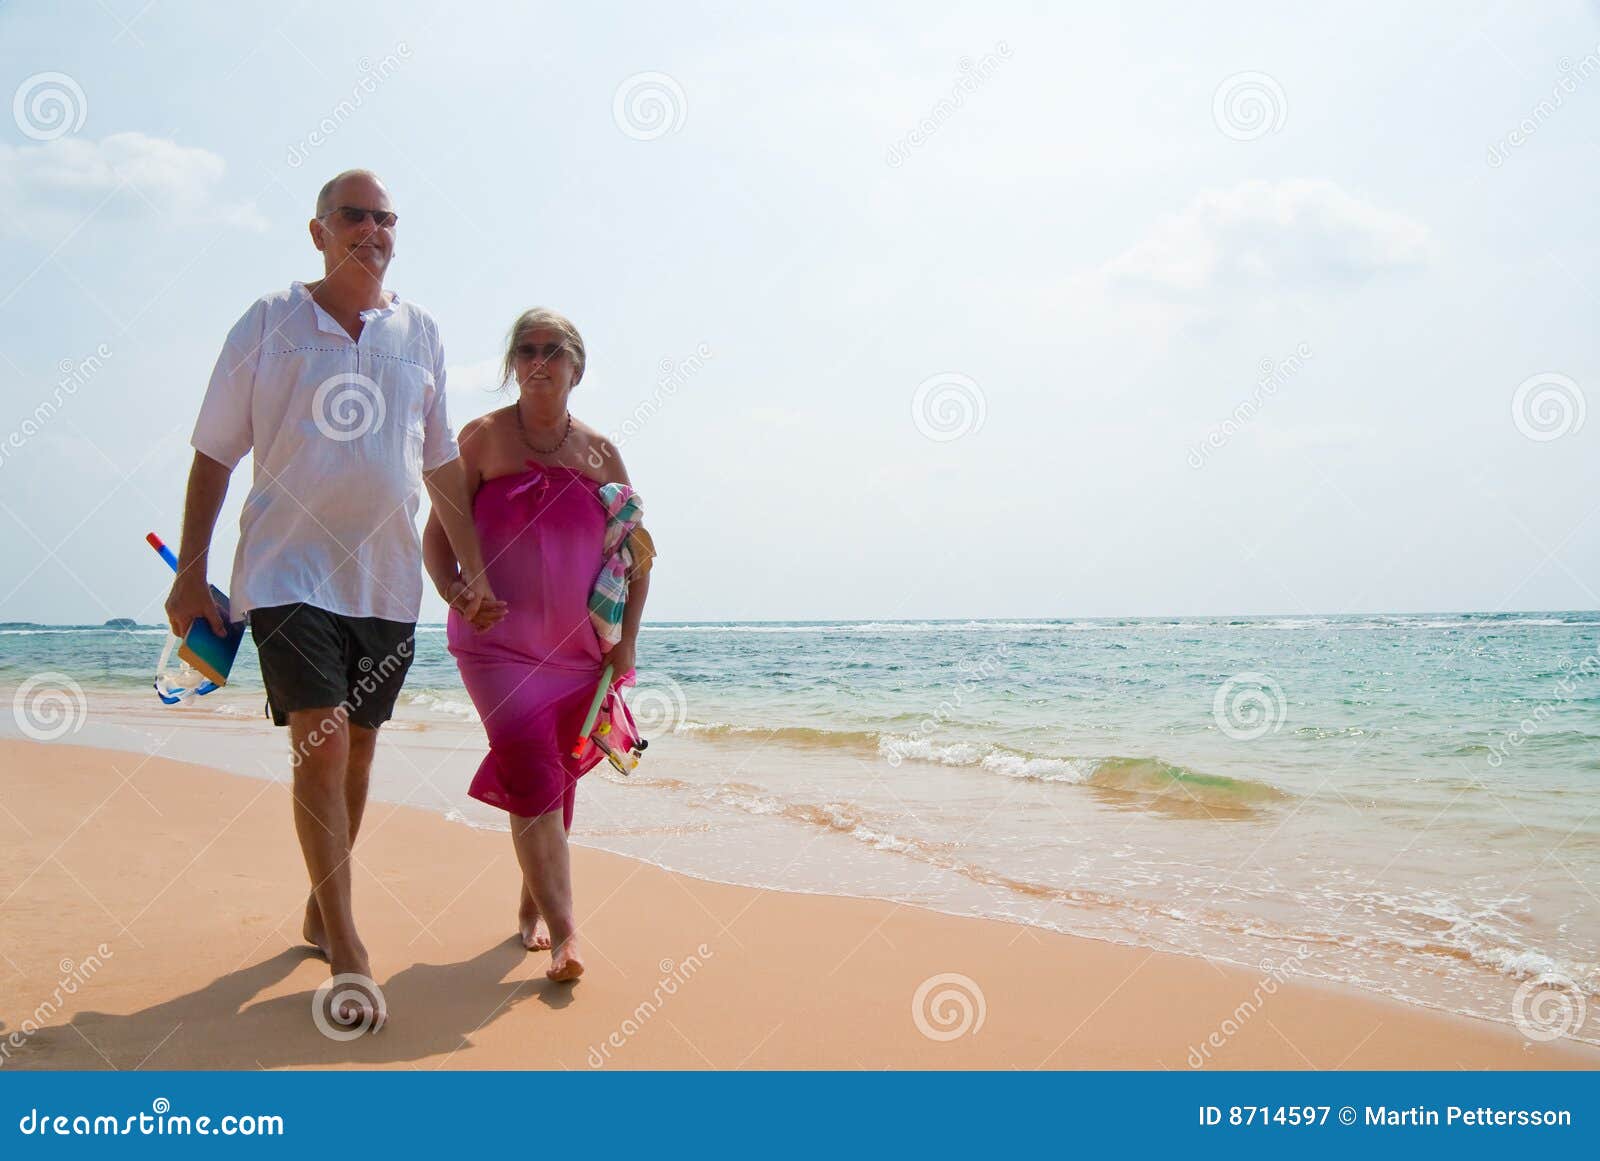 the couple beach Mature nude at